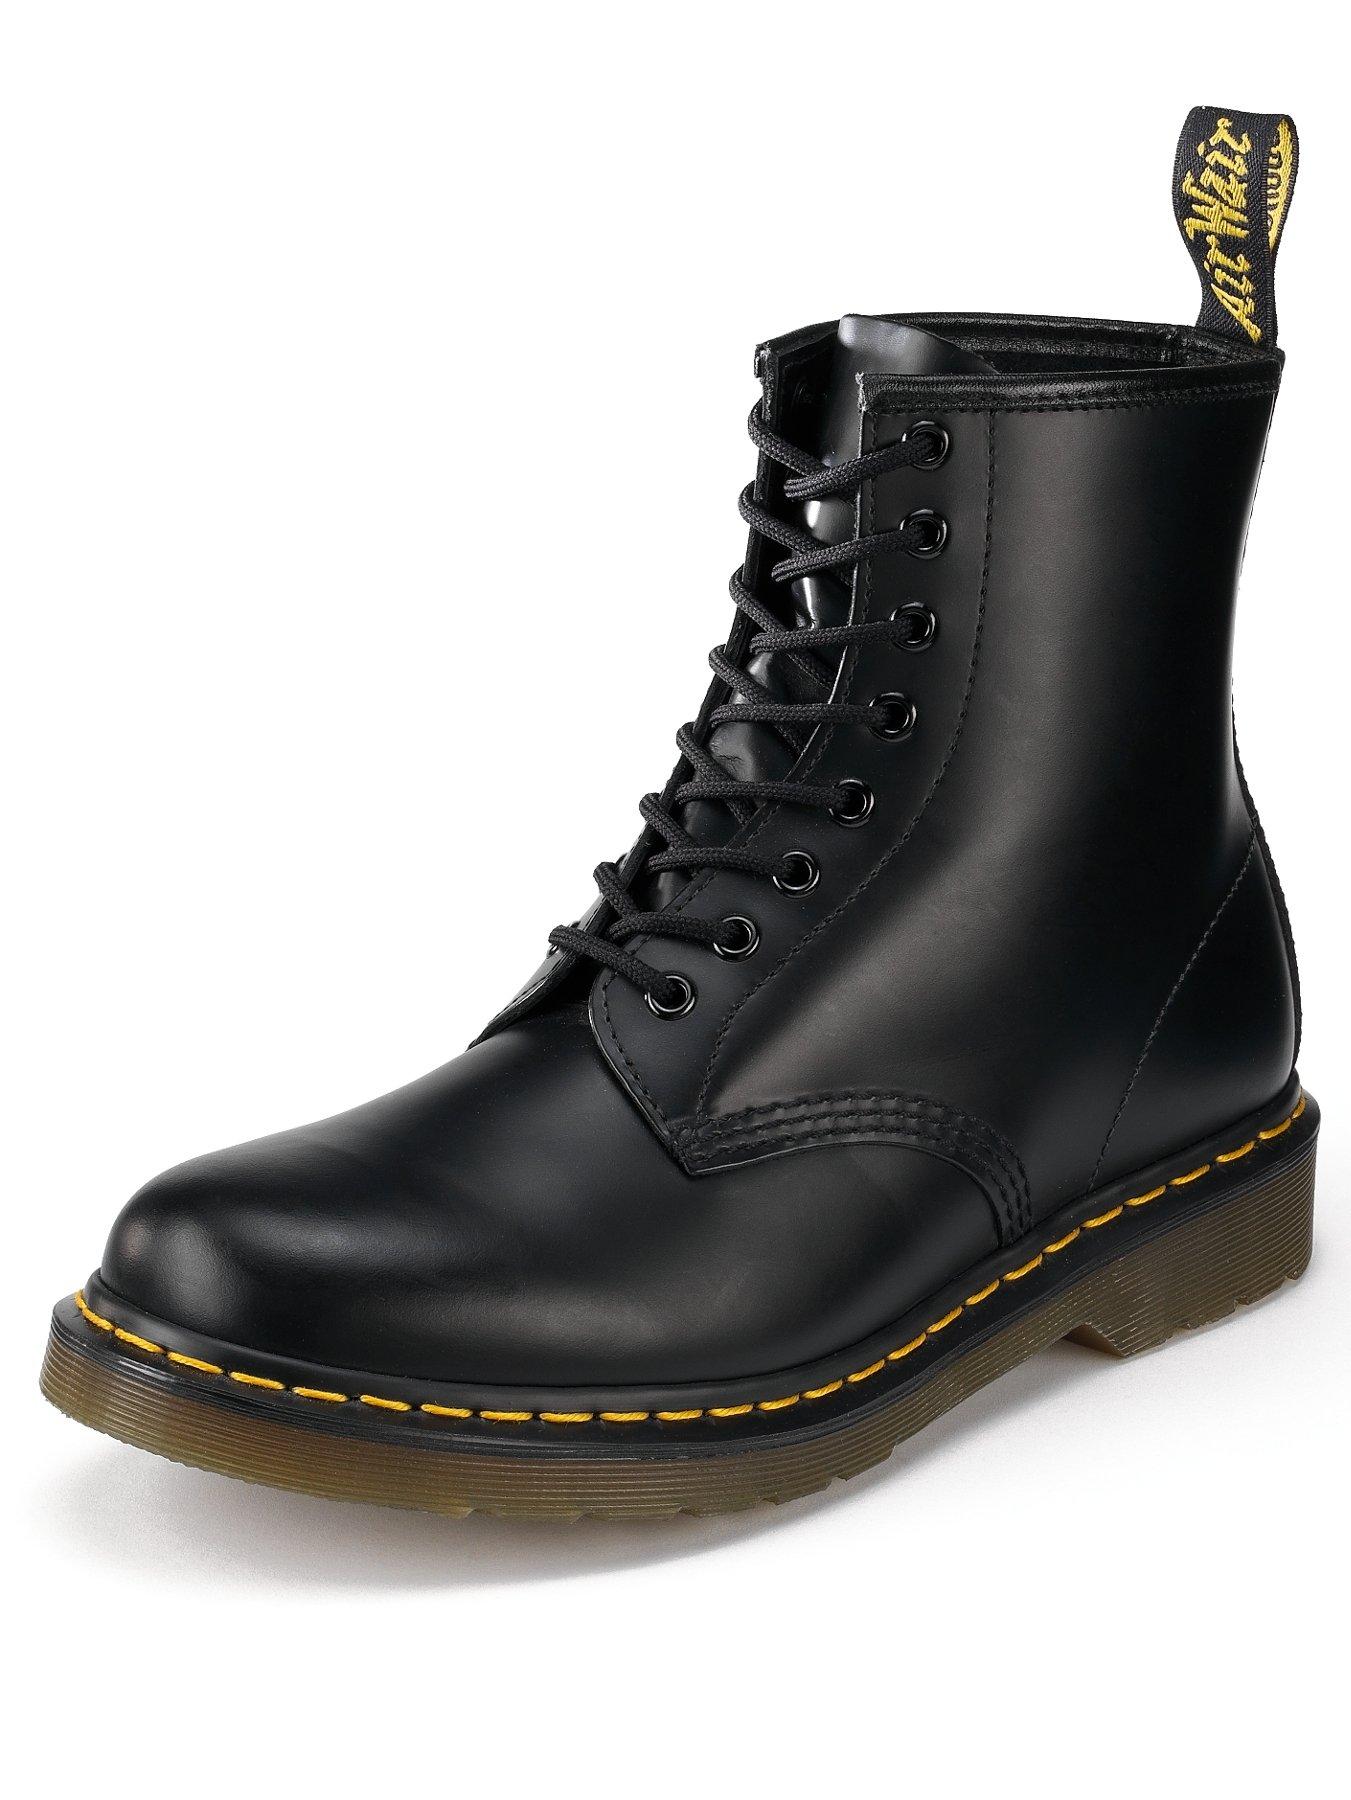 Dr Martens 1460 Smooth Boots - Black 